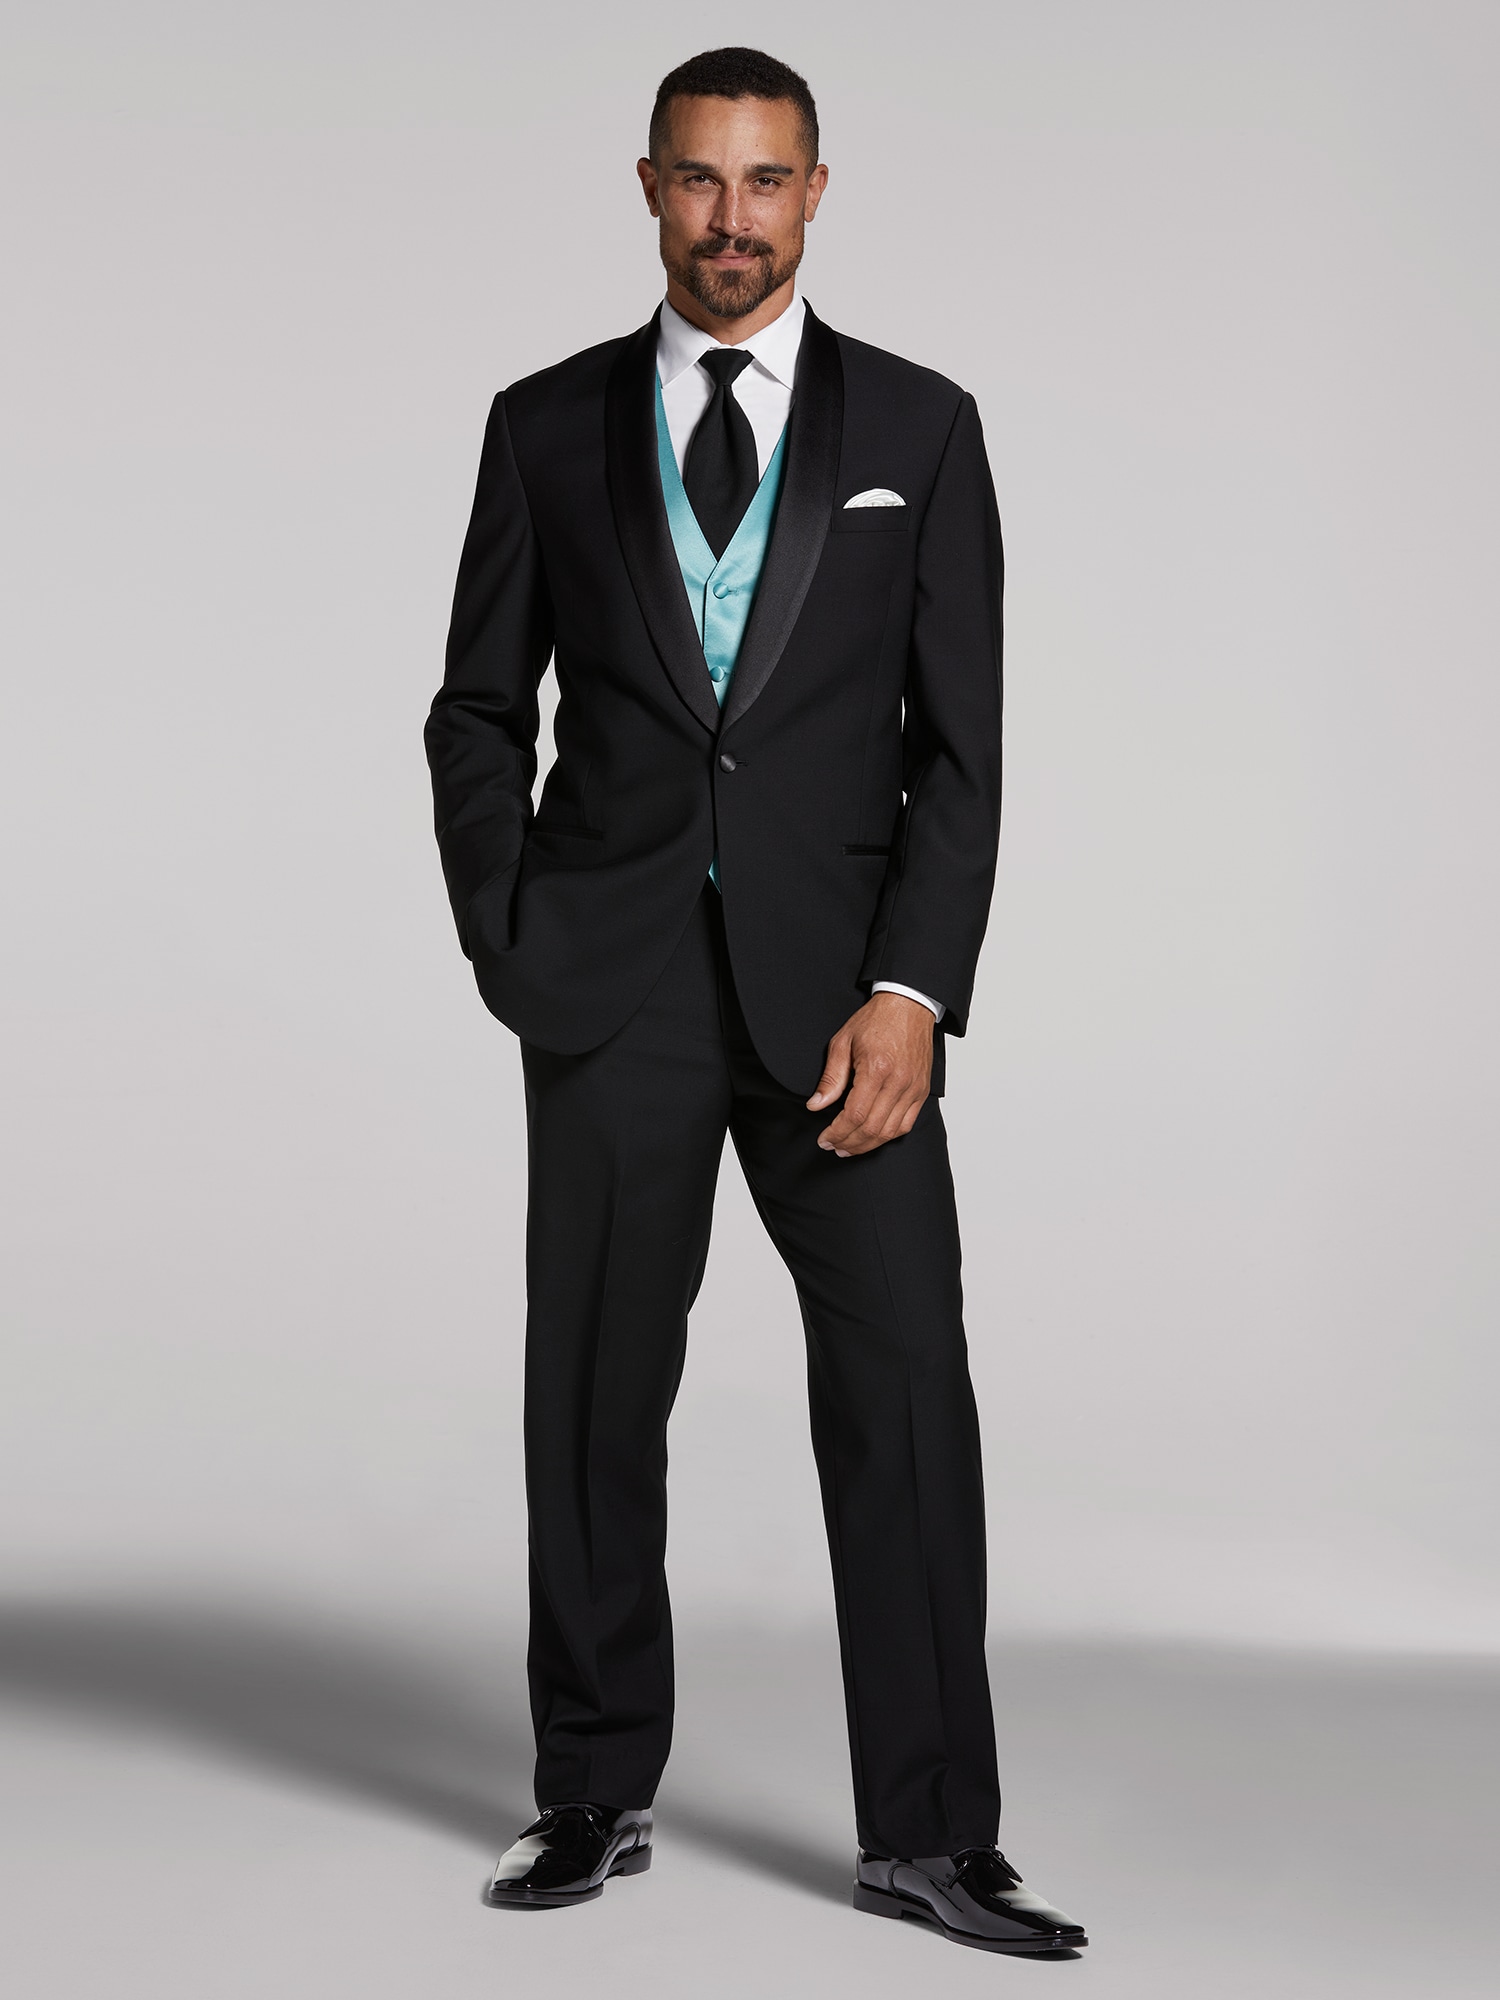 Tuxedo Styles for Special Occasions & Formal Events | Moores Clothing